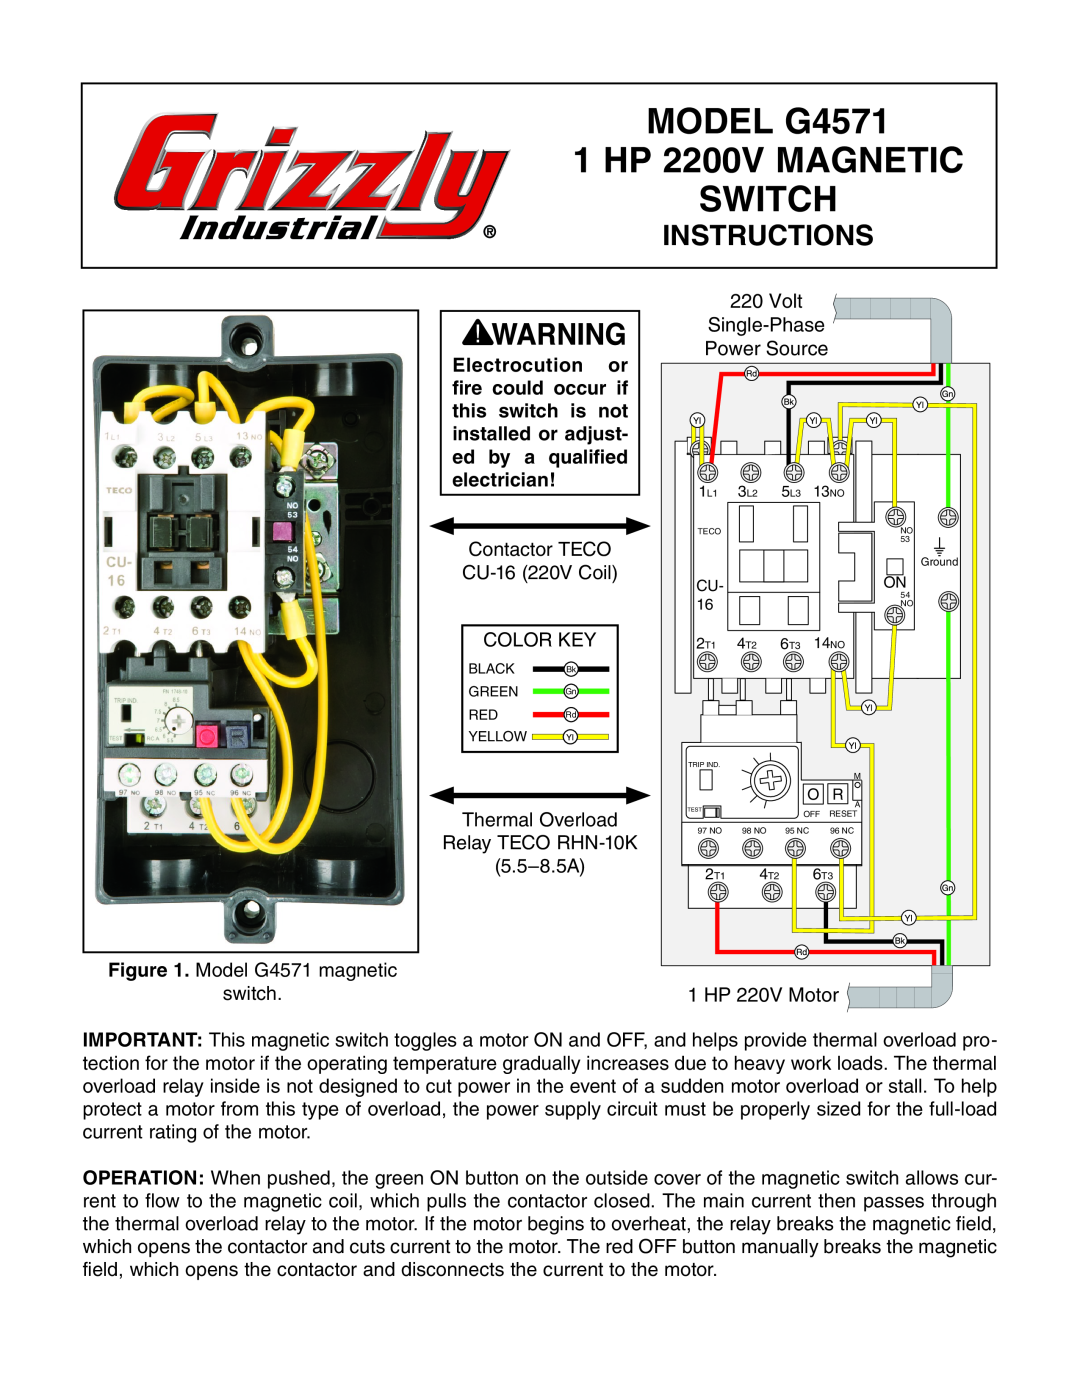 Grizzly manual MODEL G4571 1 HP 2200V MAGNETIC SWITCH, Instructions 